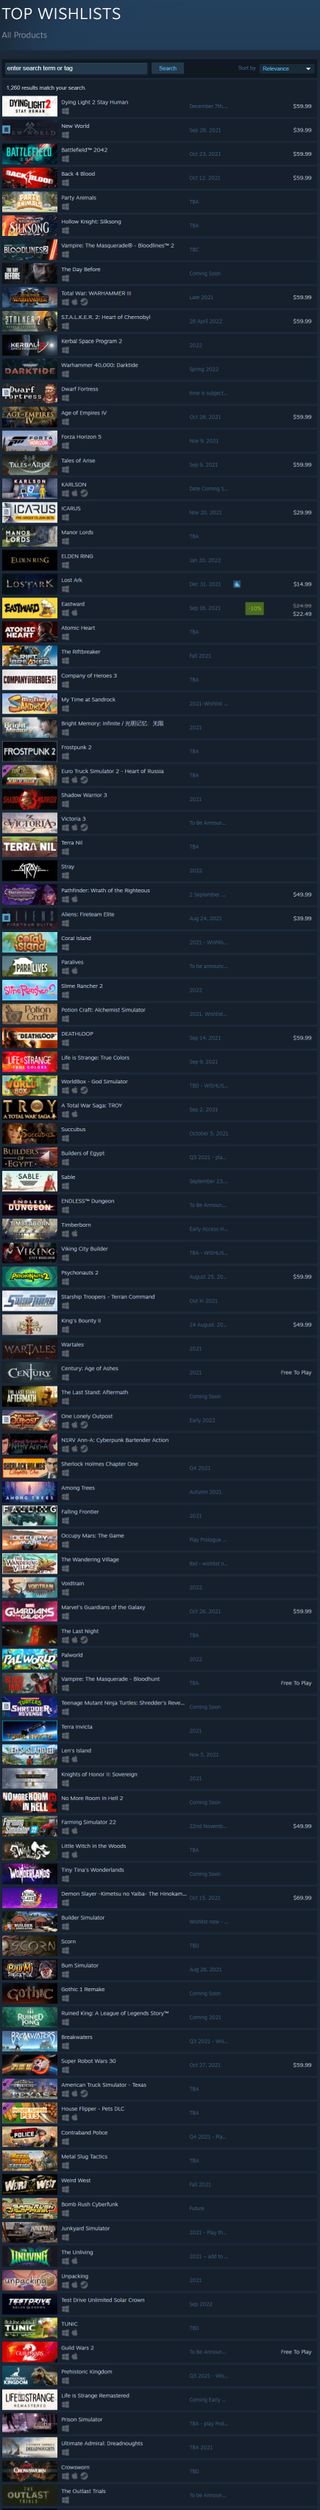 A list of the top 100 Steam most wishlisted games, as of August 23, 2021.